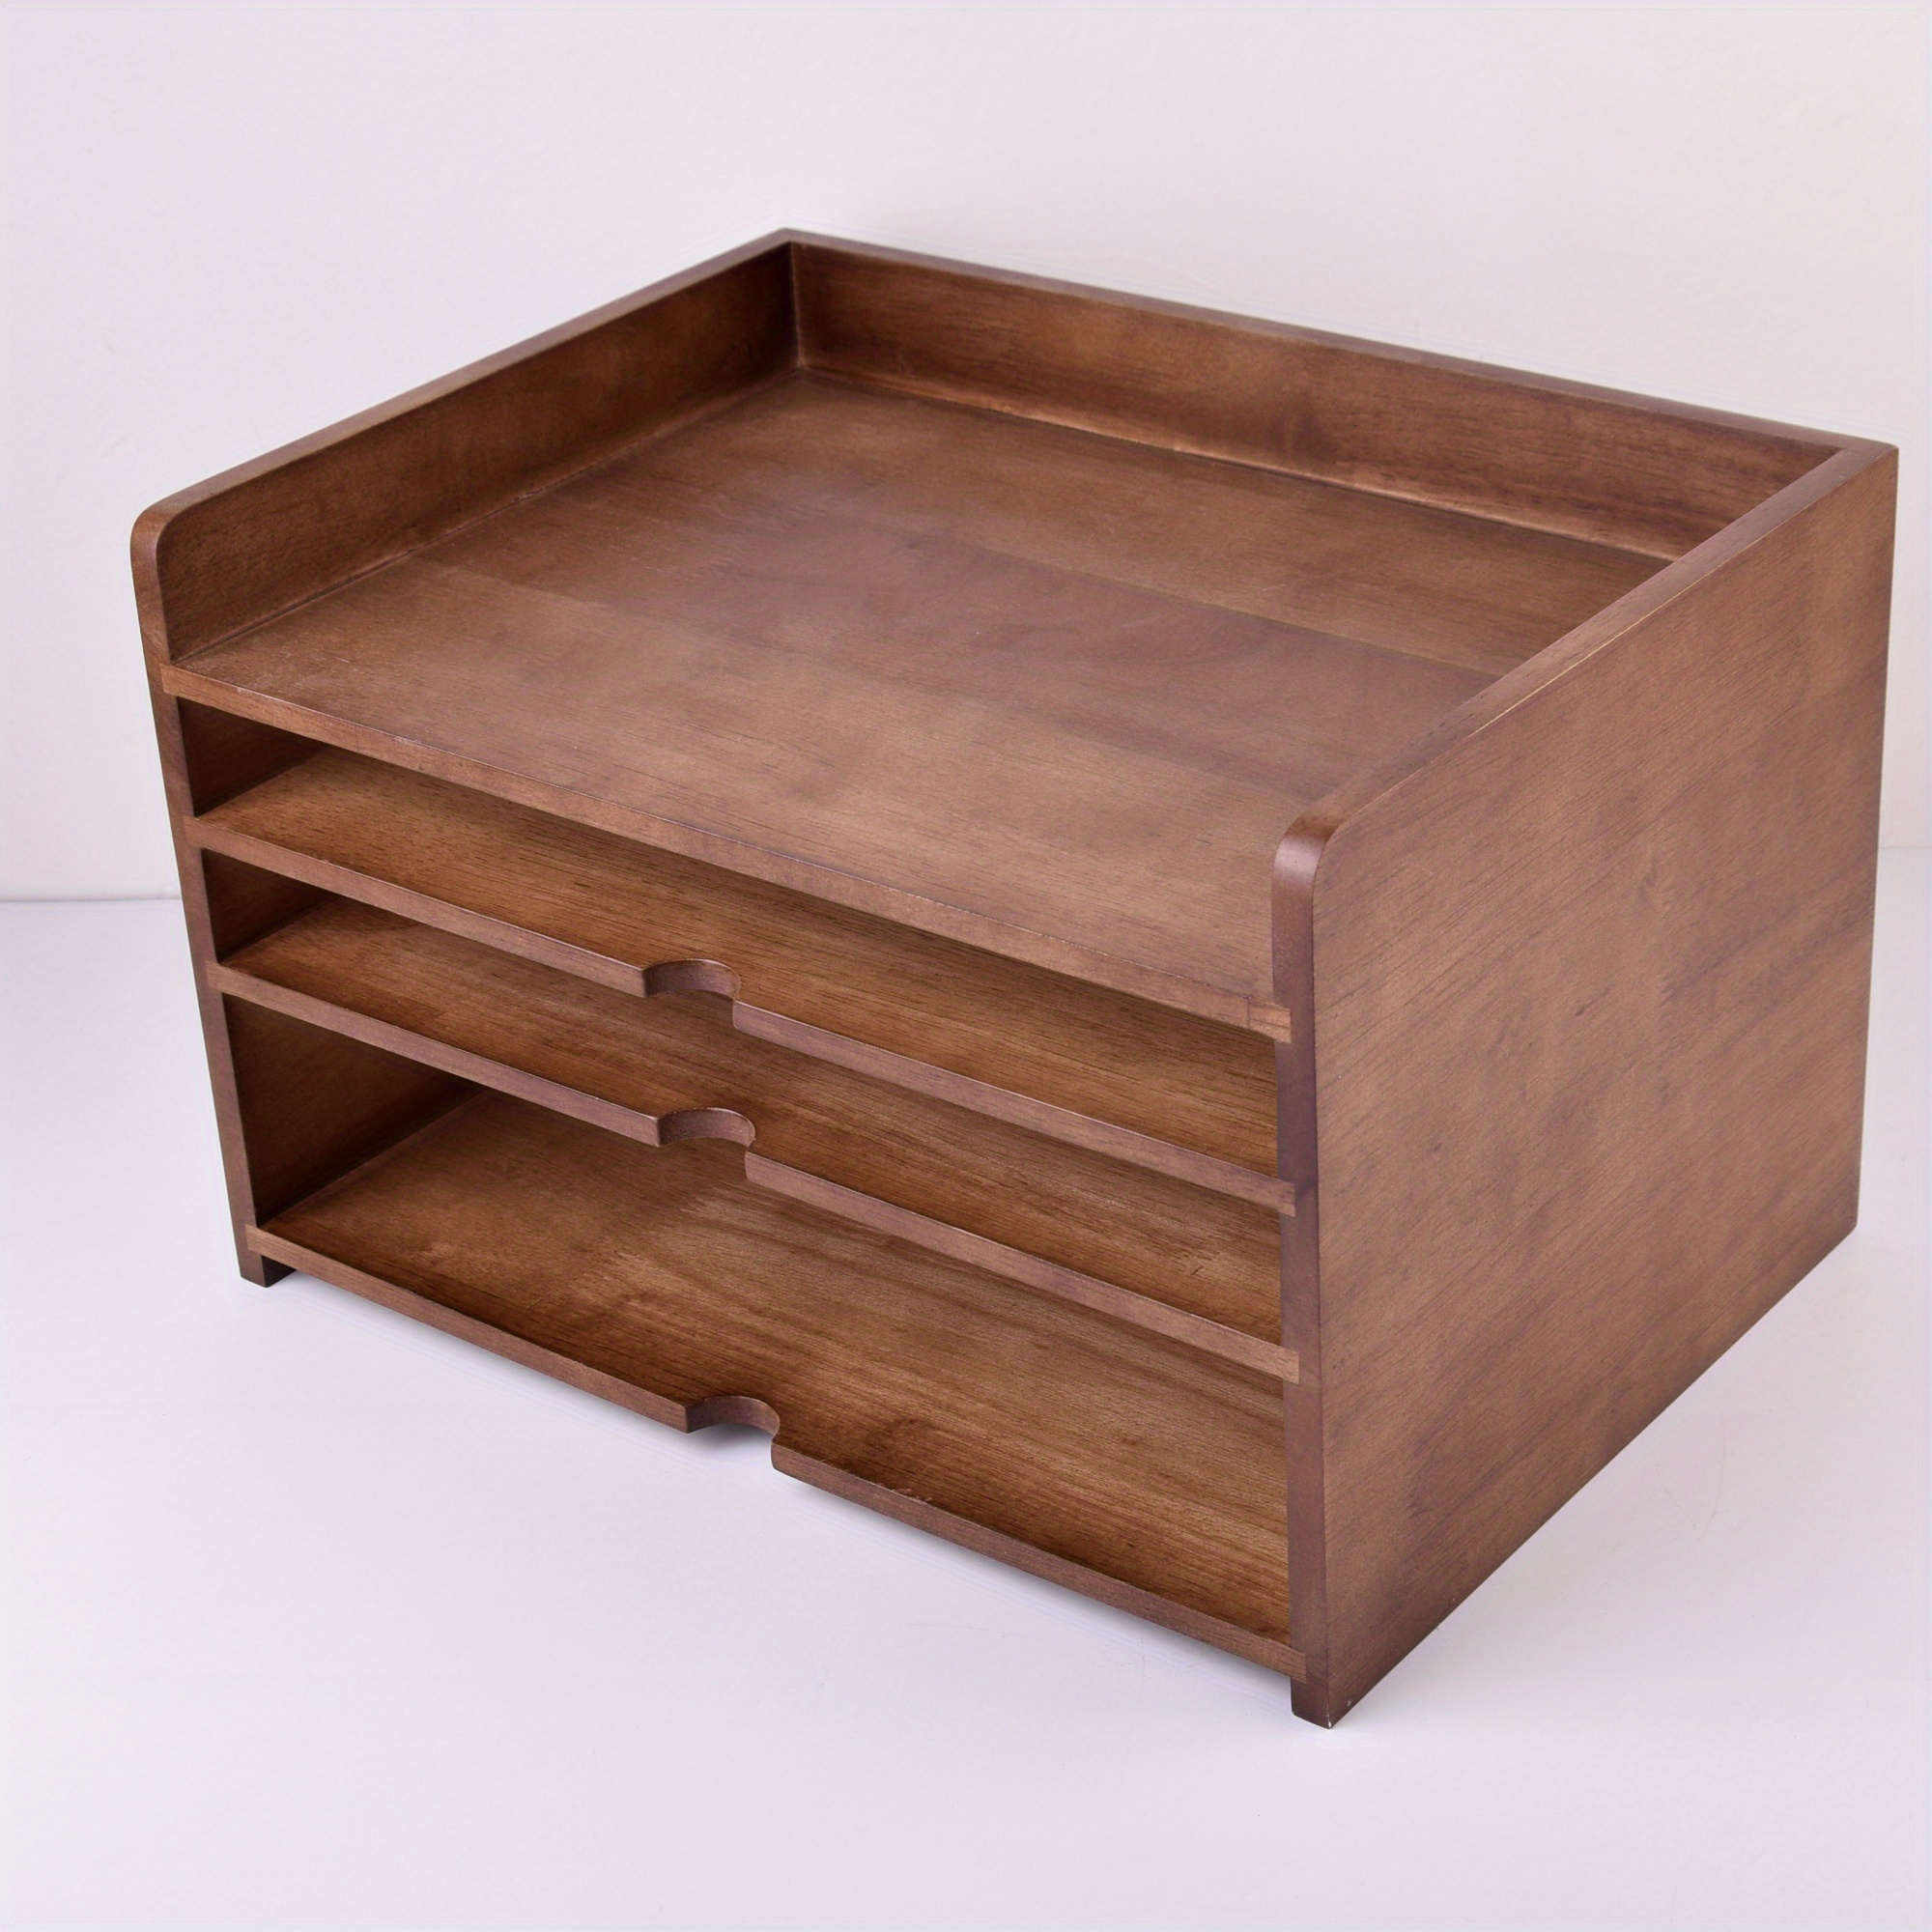 Wooden Solidwood Tray, Wooden Tray Organizer